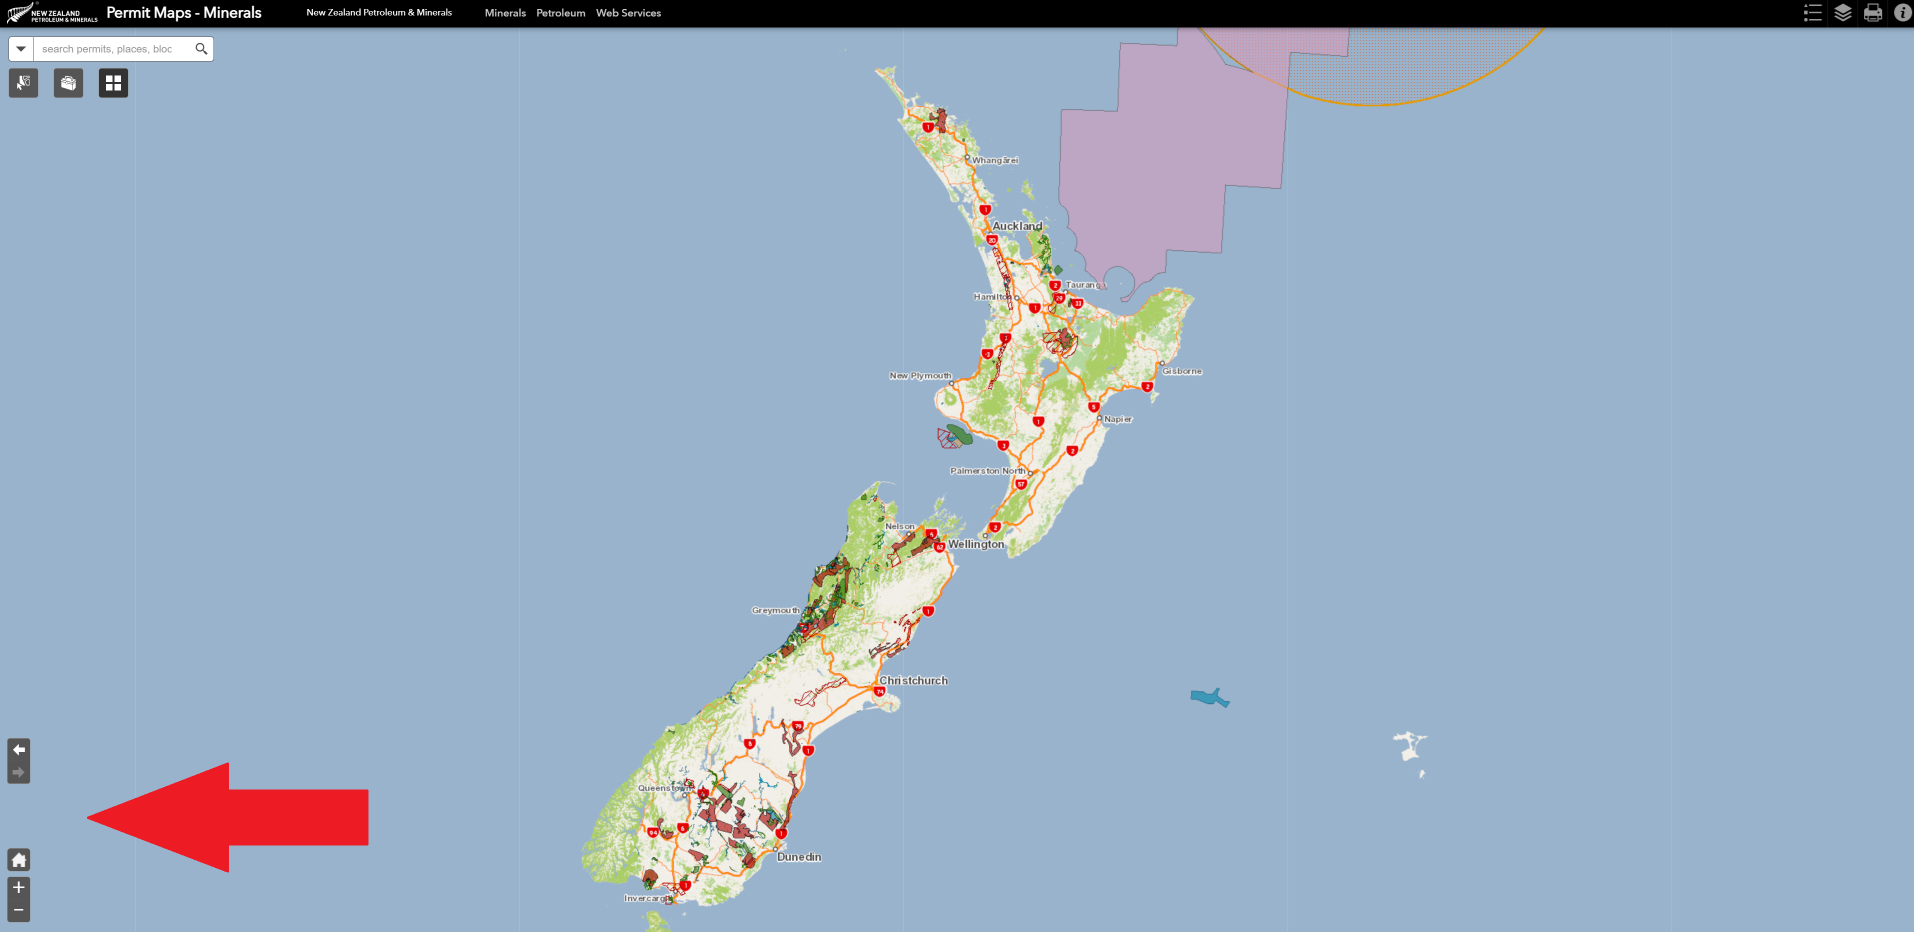 This image shows the map view of New Zealand with a red arrow pointing to the zoom and extent options for the map.